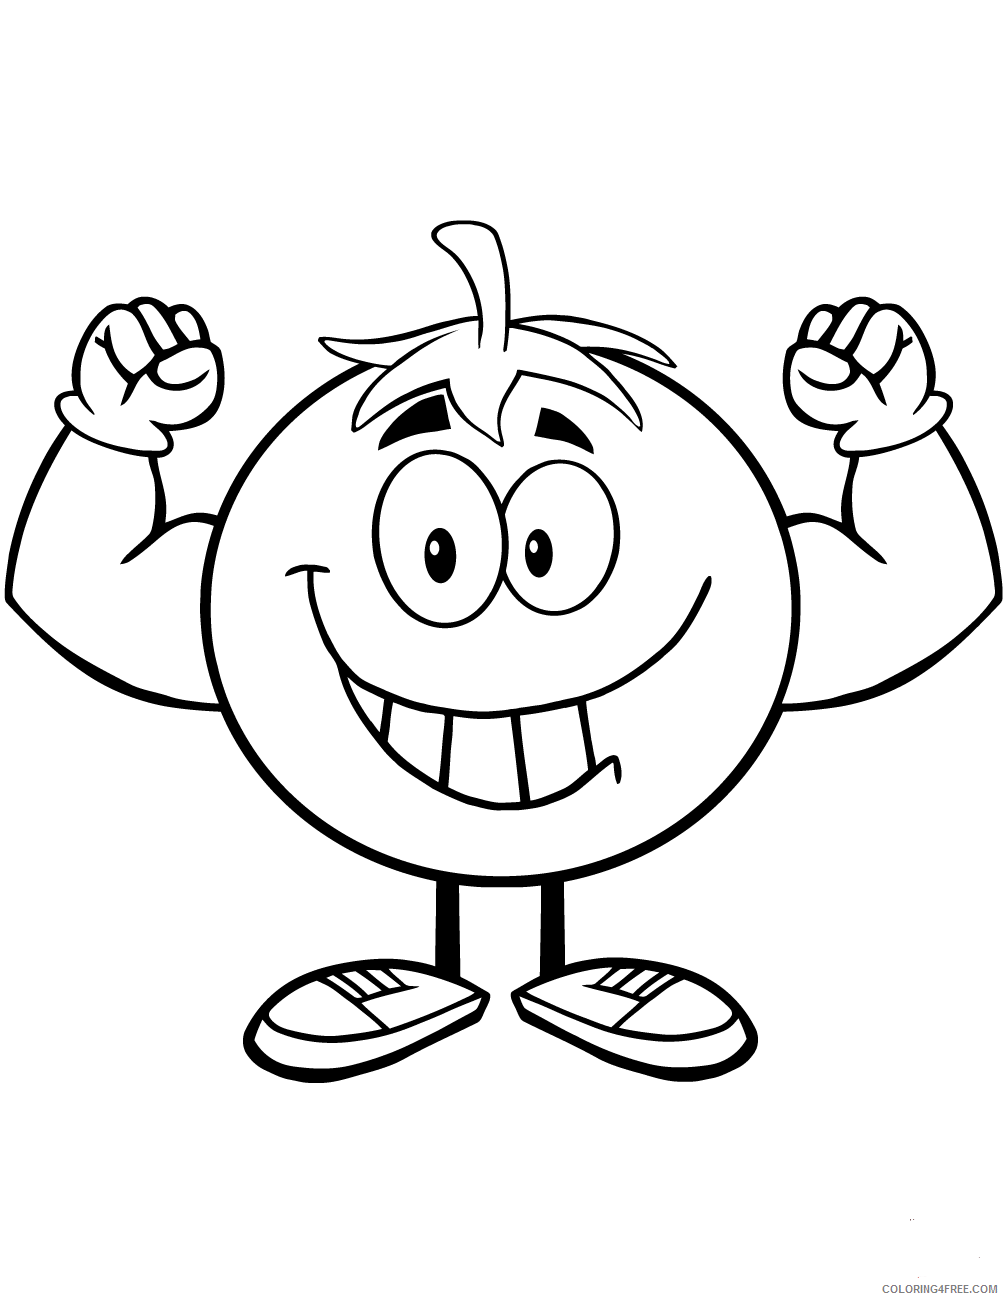 Tomato Coloring Pages Vegetables Food strong tomato cartoon mascot character 2021 Coloring4free